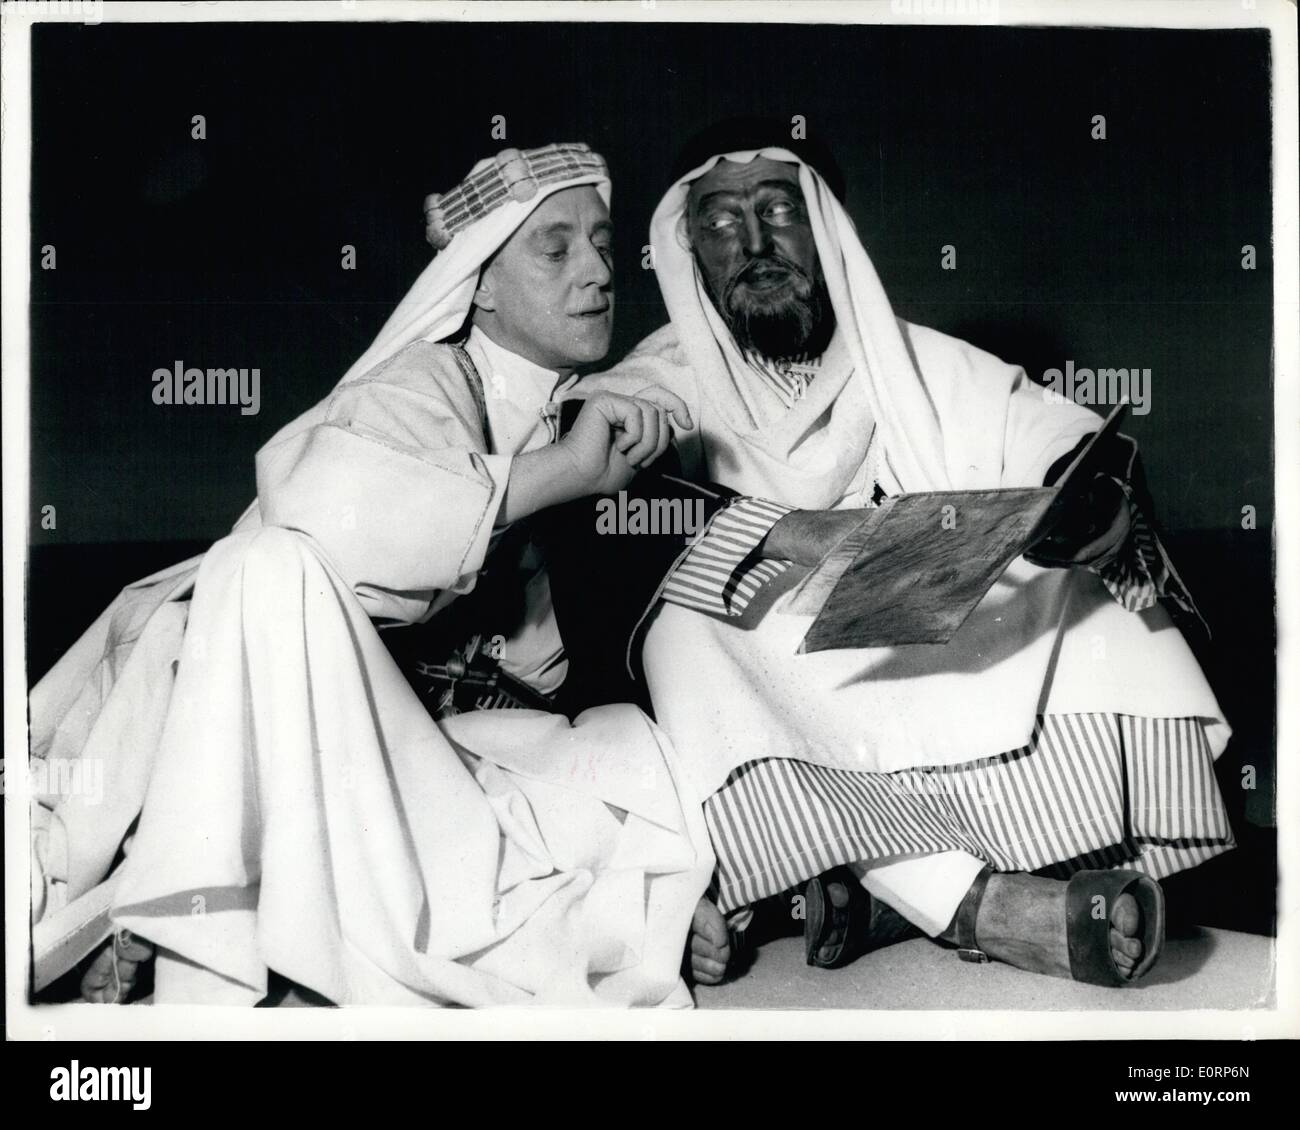 Apr. 04, 1960 - Sir Alec Guinness Plays ''Lawrence Of Arabia'': Sir Alec Guinness is presenting the role of Lawrence Of Arabia -- in the play ''Ross'' -- now at the Royal Court Theater, Liverpool....The play is by Terence Rattigan.. Photo Shows Sir Alec Guinness as Lawrence talking of Mark Digman who is Auda -- in the premiere of the play at the Royal Court, Liverpool. Stock Photo